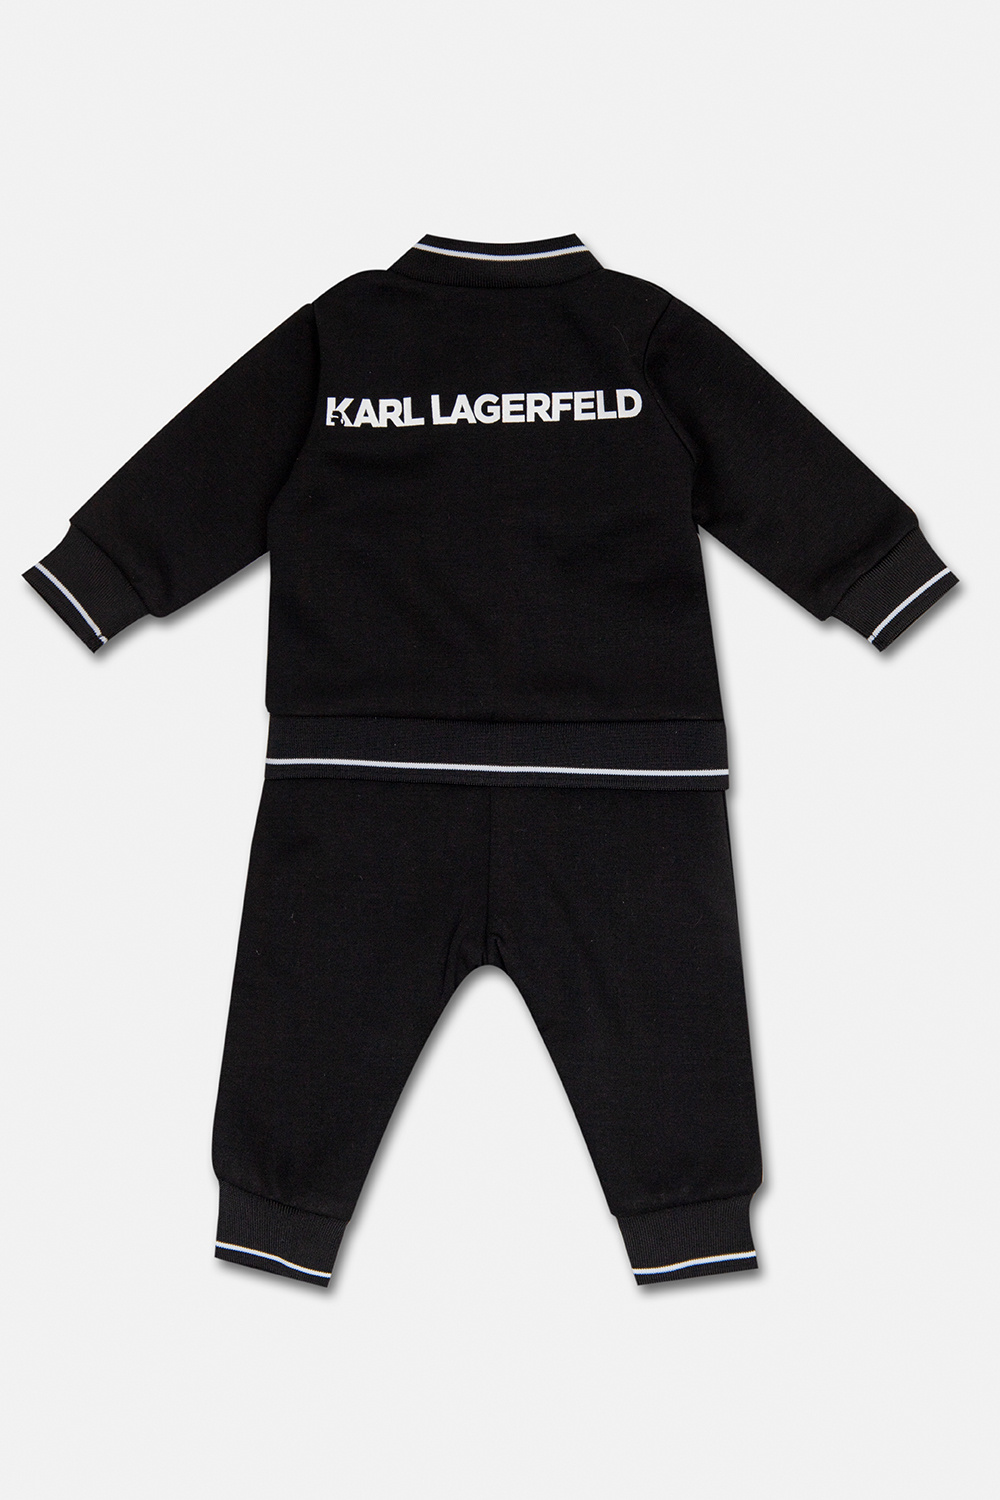 Karl Lagerfeld Kids Luggage and travel